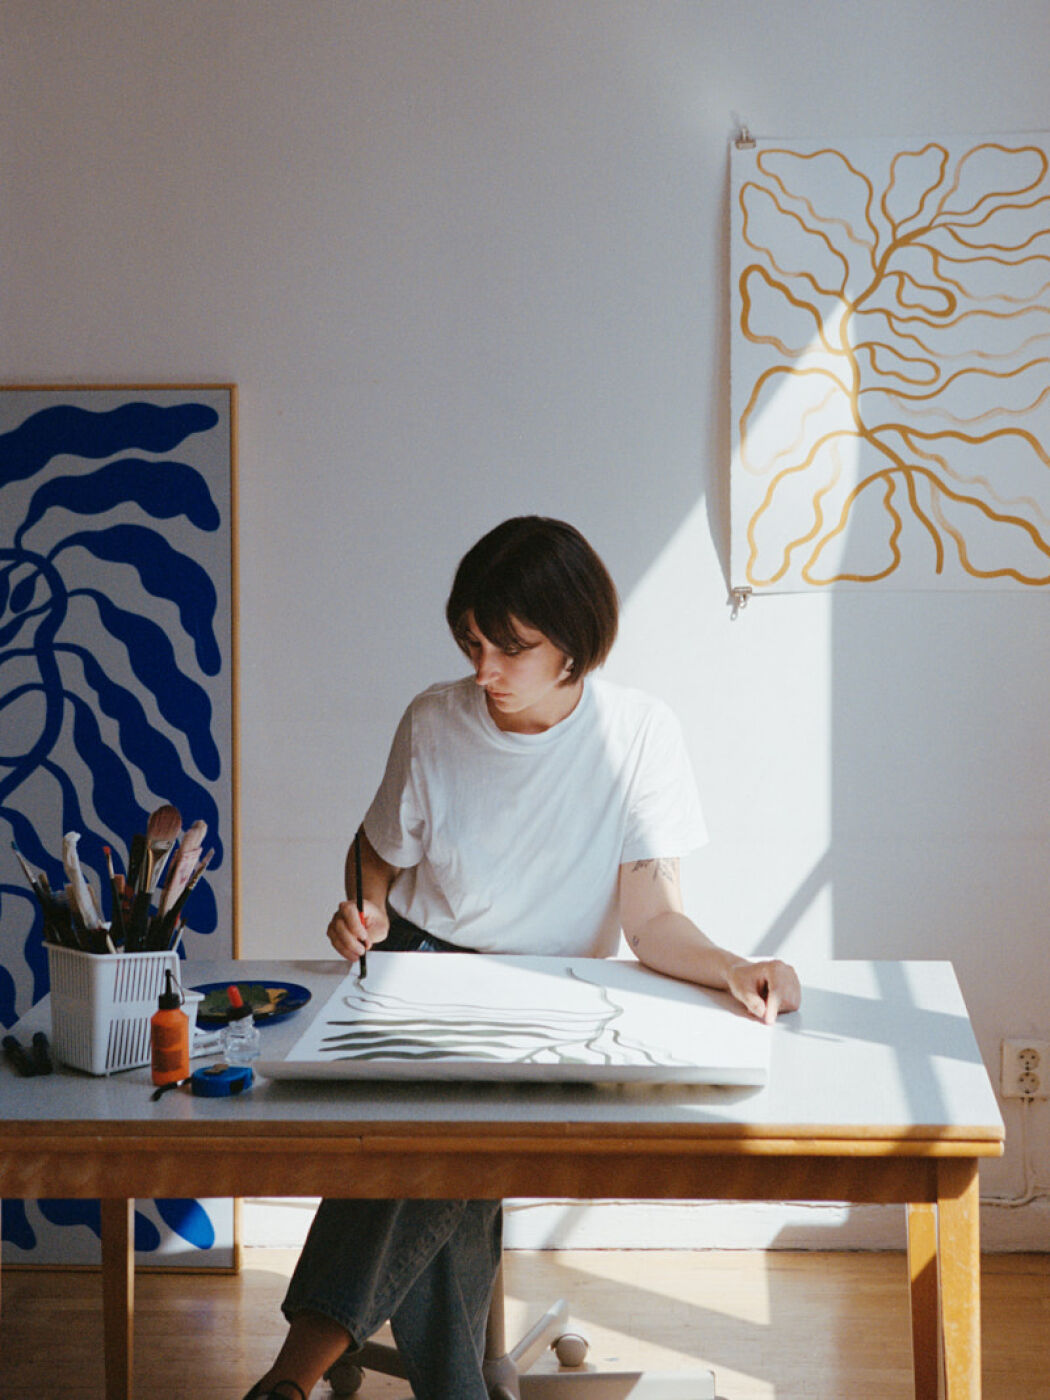 The artist and illustrator Linnéa Andersson in her studio